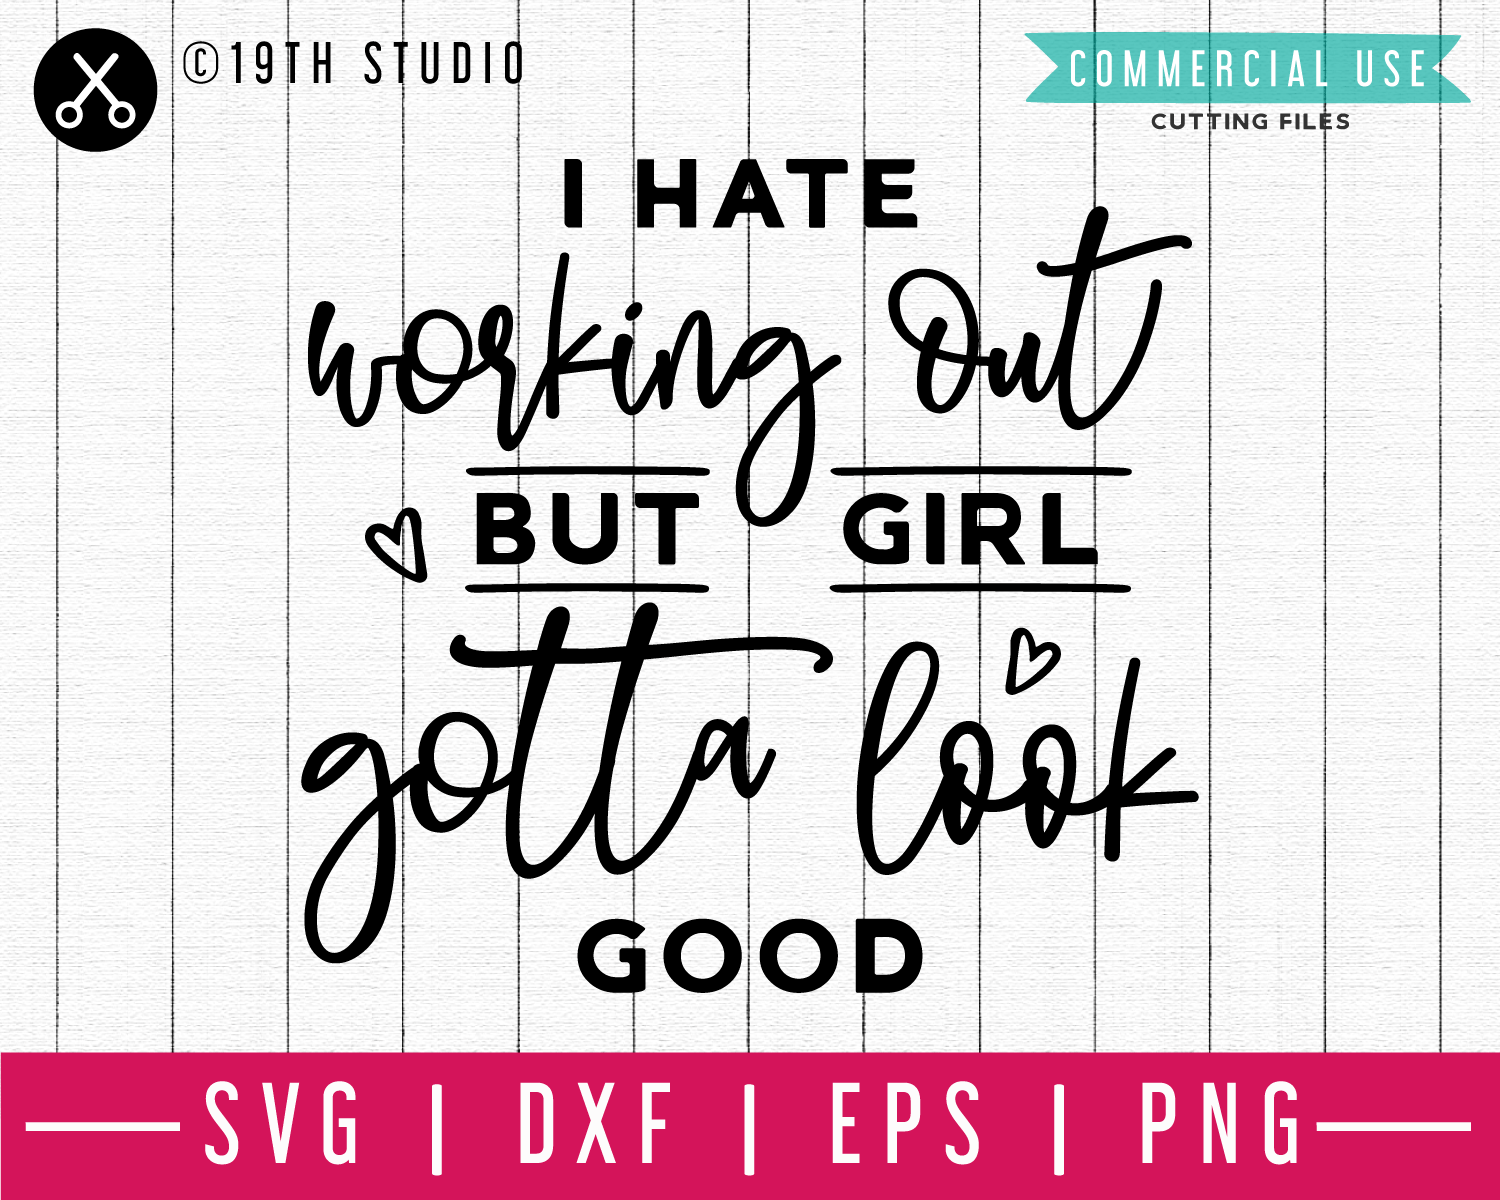 I hate working out but girl gotta look good SVG | A Gym SVG cut file | M44F Craft House SVG - SVG files for Cricut and Silhouette